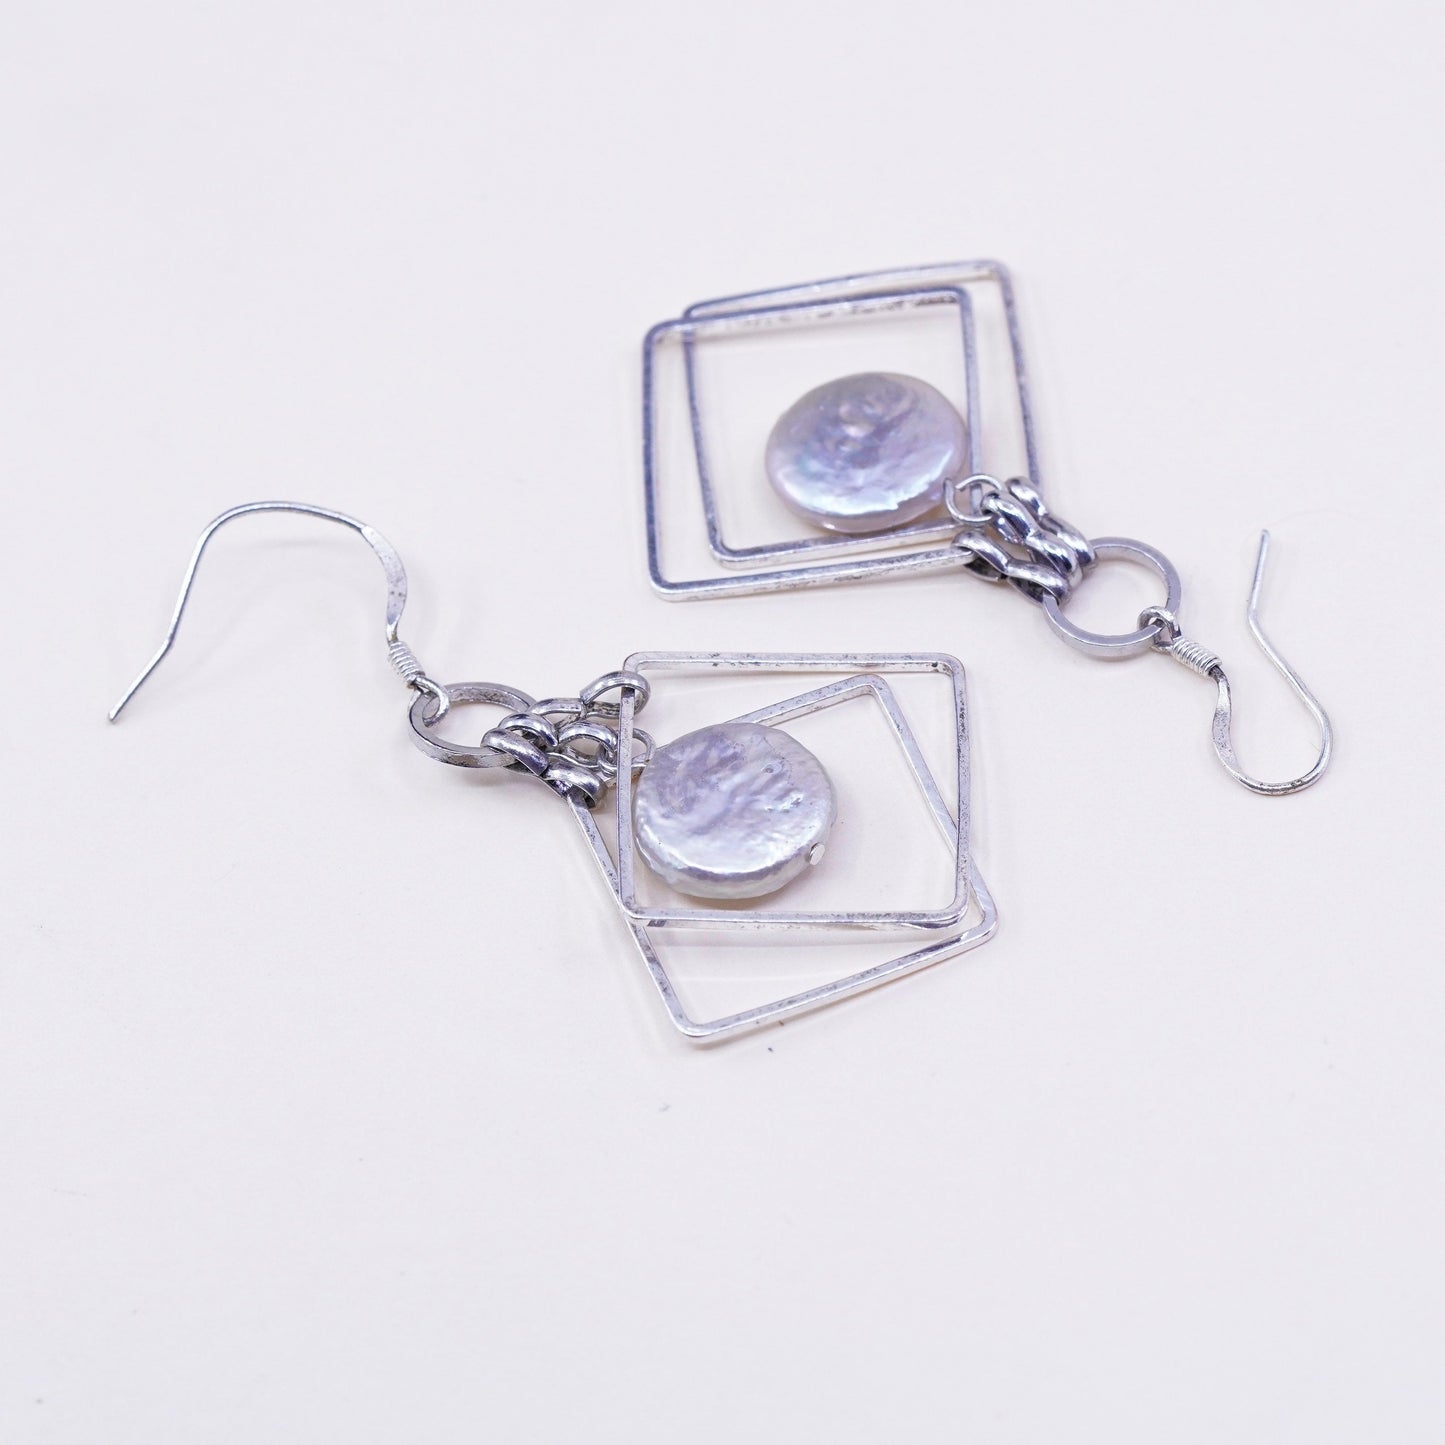 Vintage sterling silver handmade earrings, 925 square dangles with coin pearl